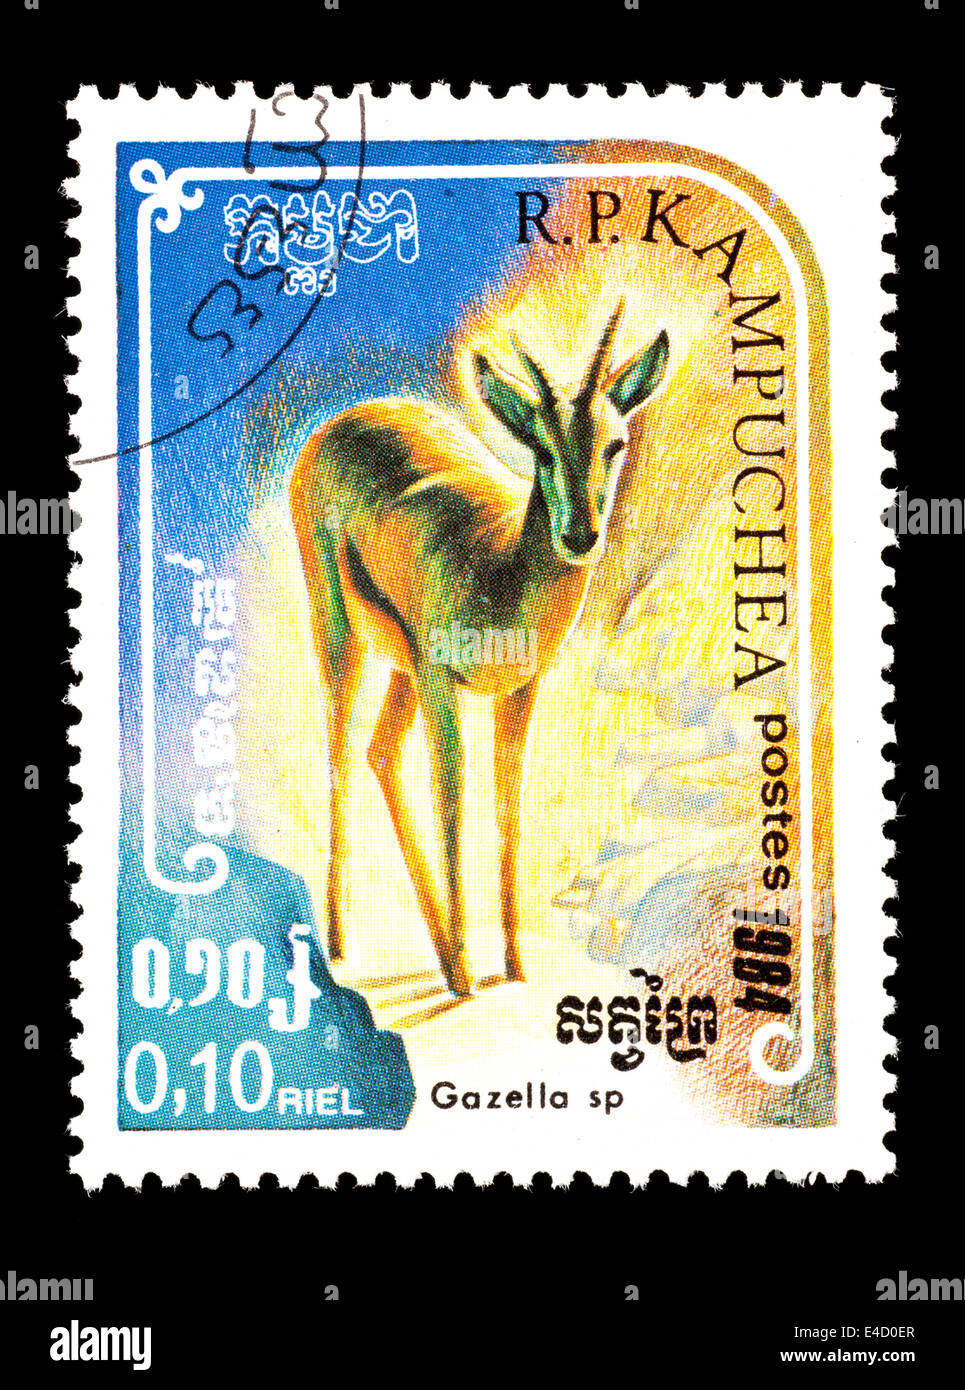 Postage stamp from Kampuchea depicting a gazelle. Stock Photo